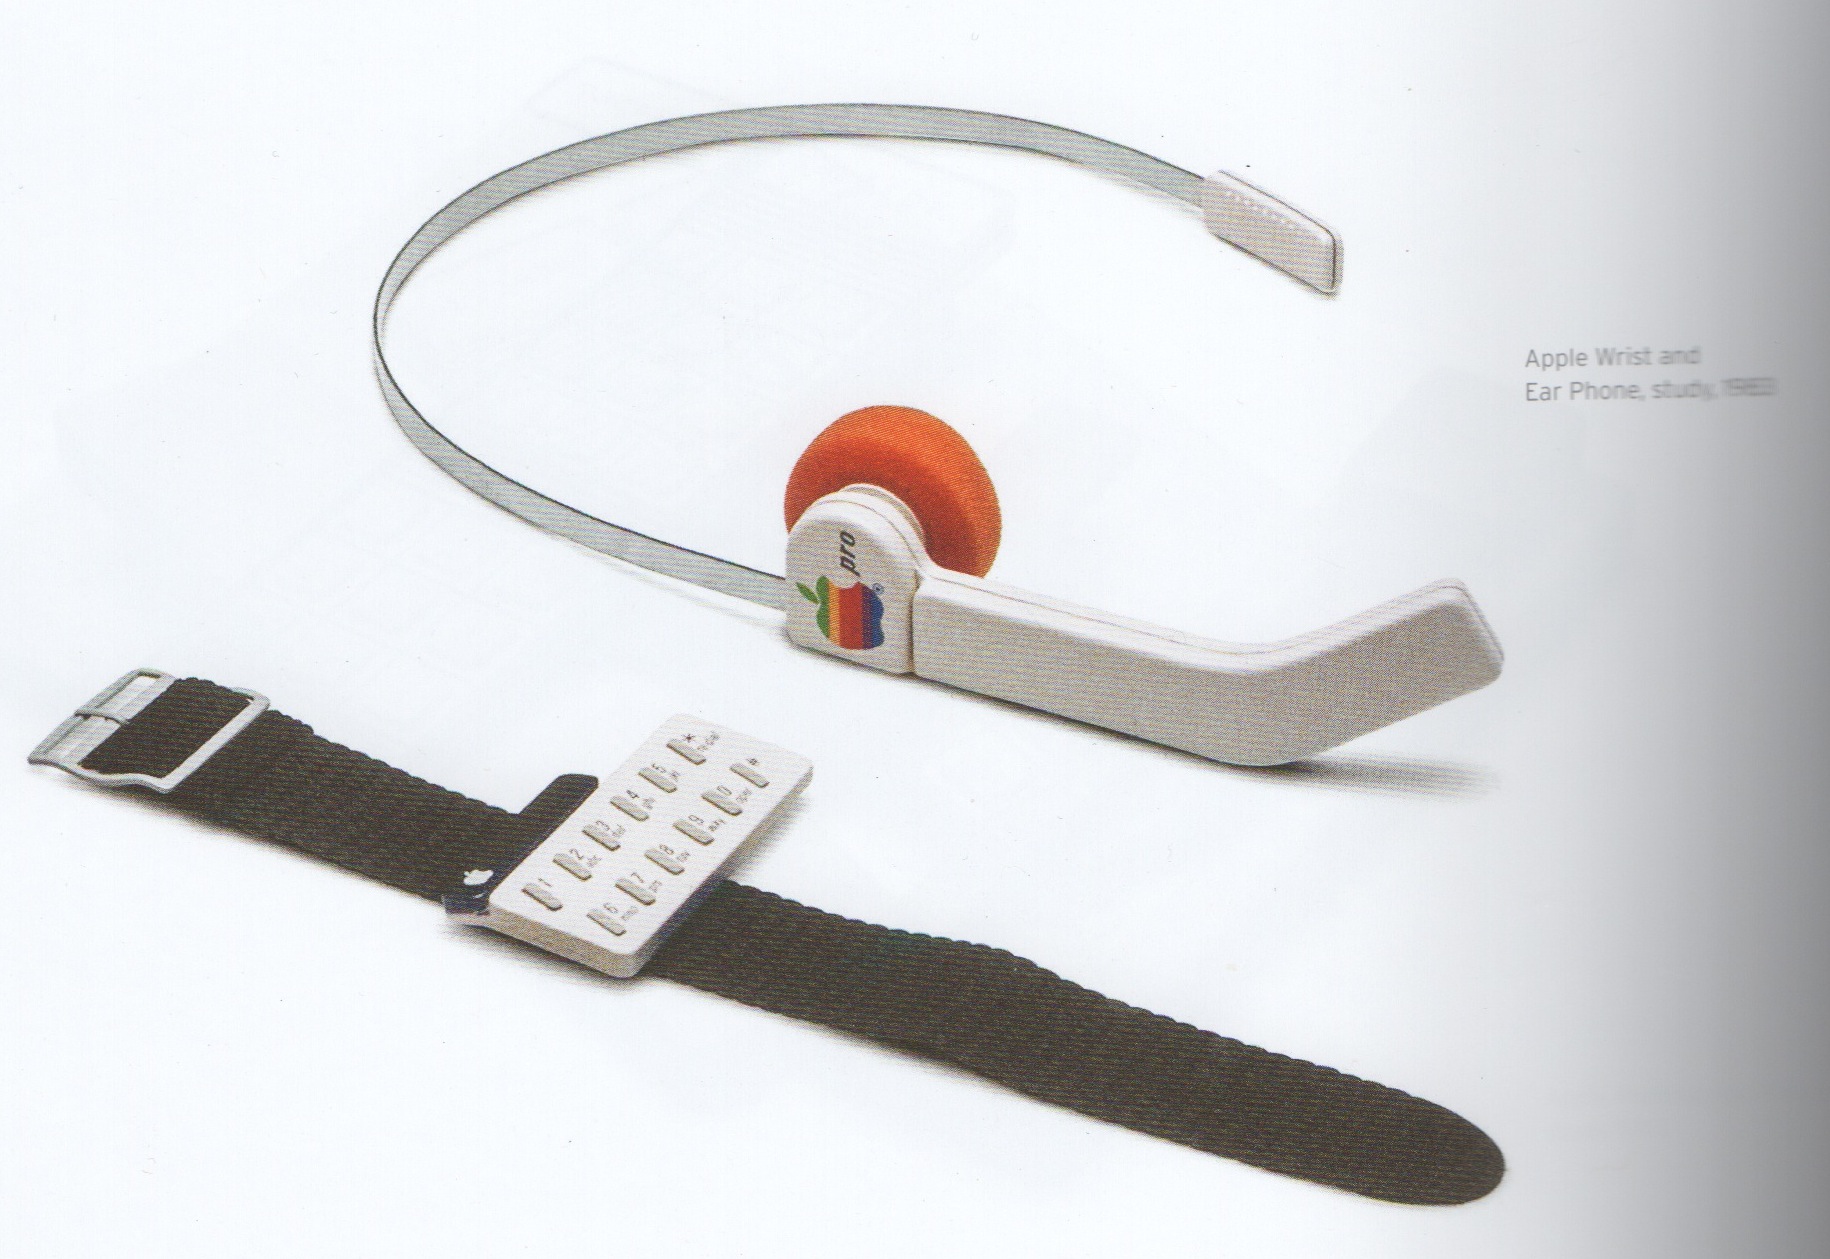 In 1983, Apple had a watch.  It took 21 years to perfect & announce it.